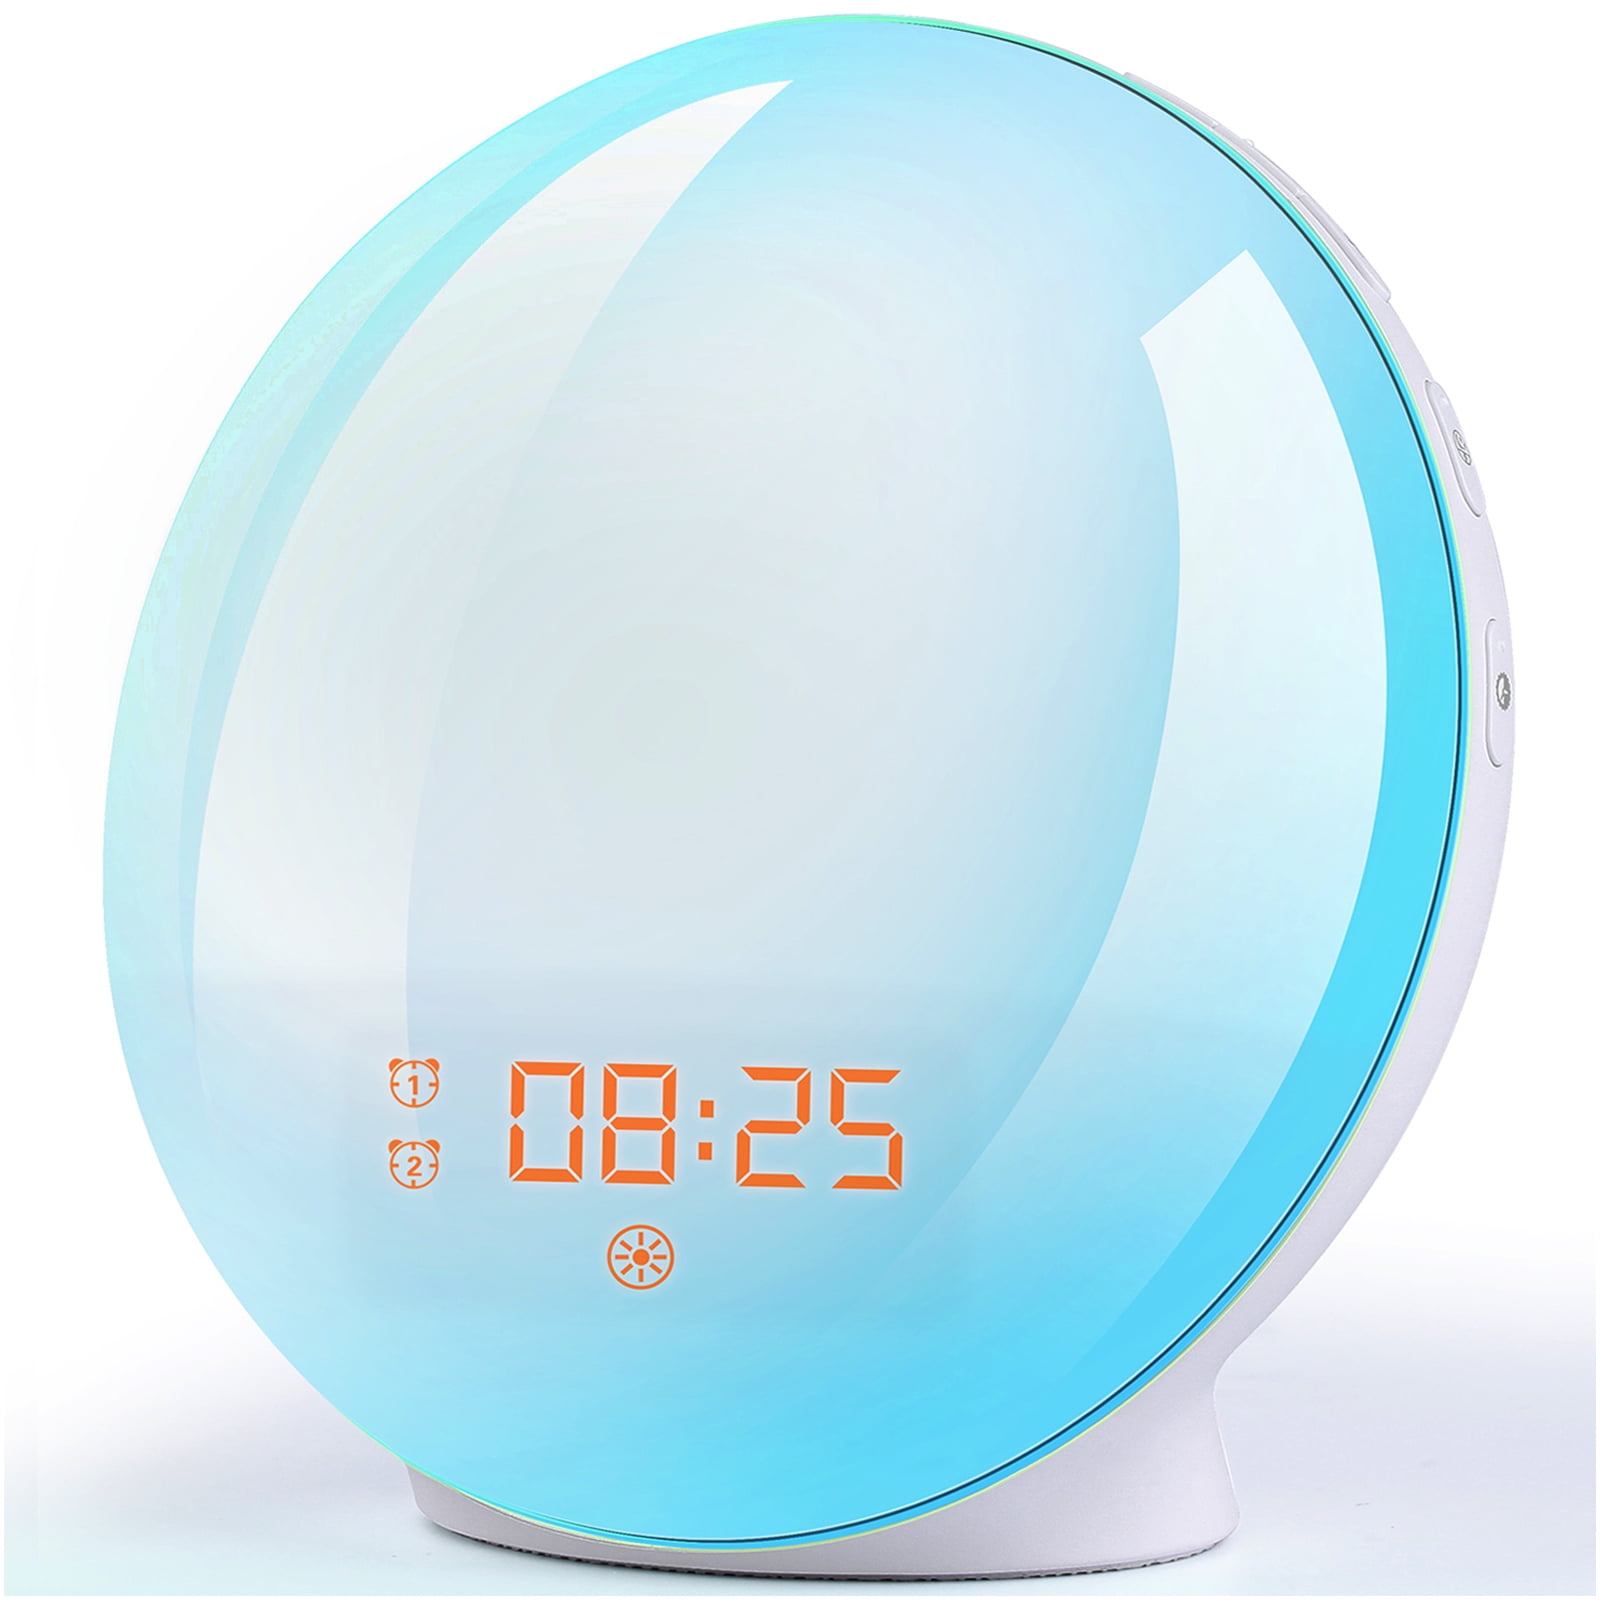 Snooze Teens Wake Up Light Sunrise Alarm Clock for Heavy Sleepers Adults Dual Alarms 7 Natural Sounds/Colors Kids with Sunrise/Sunset Simulation Ideal Gift FM Radio Bedroom 